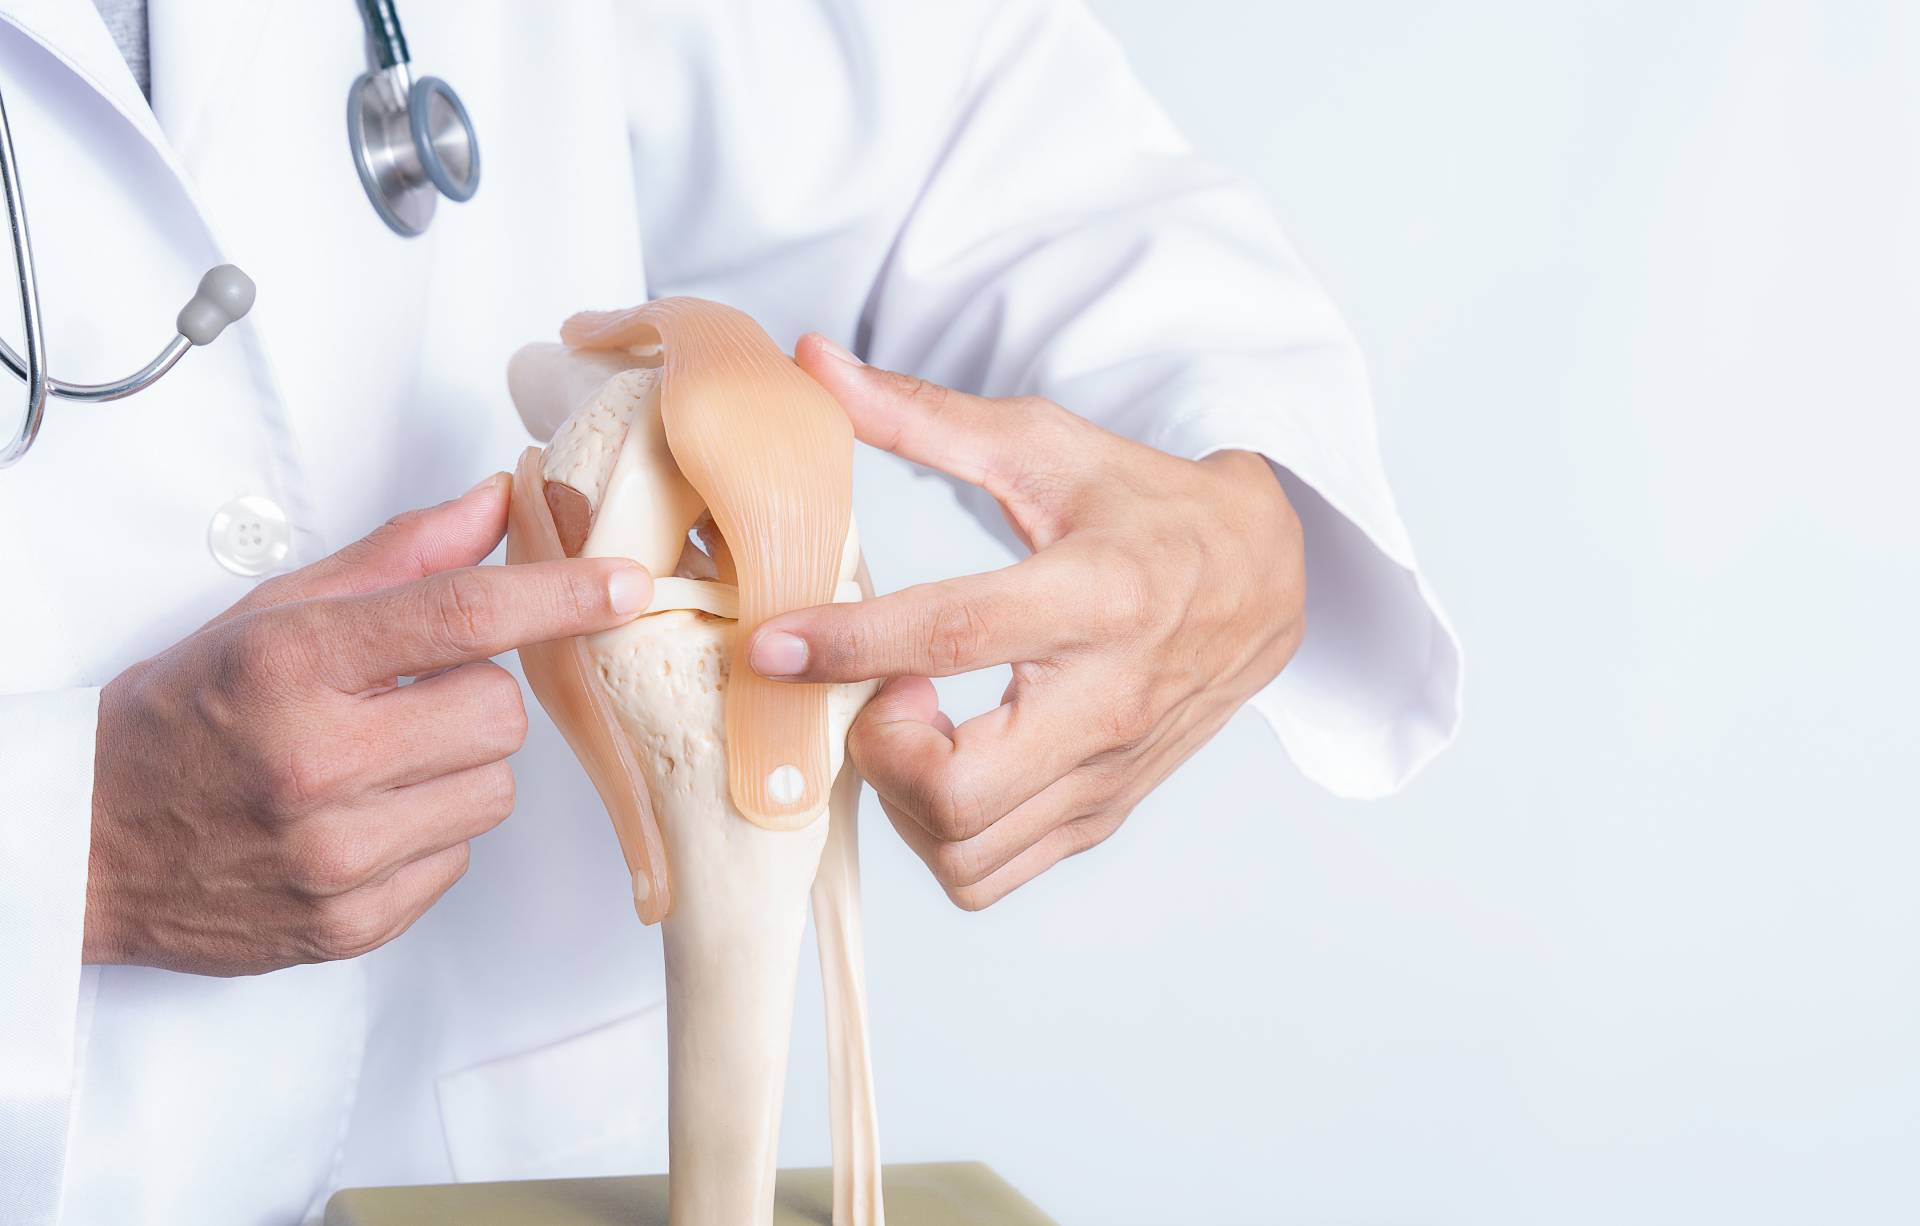 Case Studies from an Orthopedic Surgeon